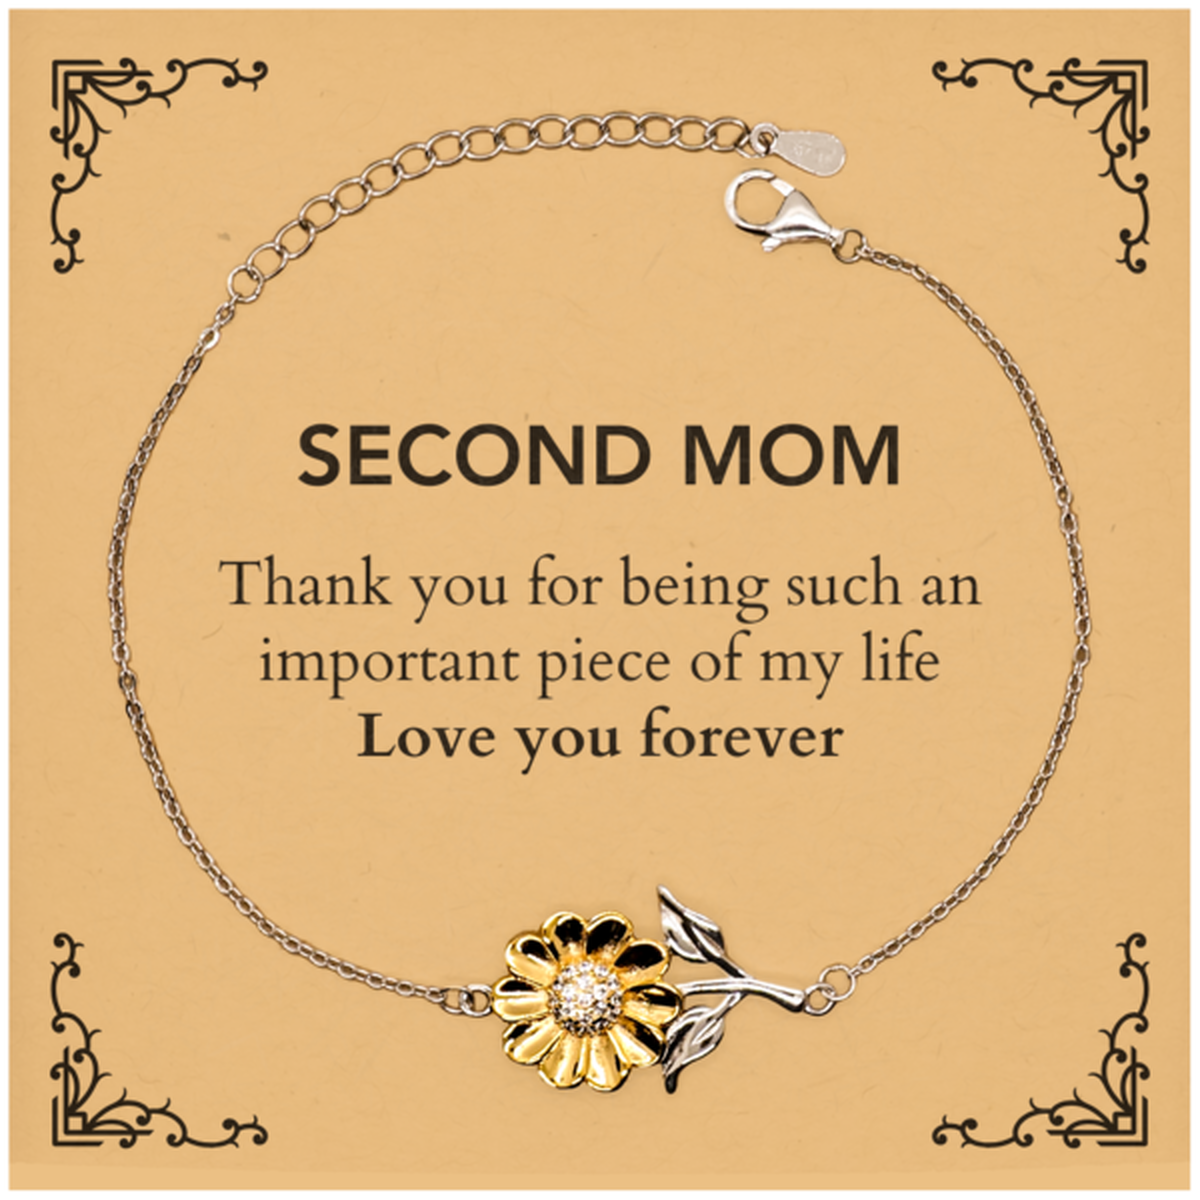 Appropriate Second Mom Sunflower Bracelet Epic Birthday Gifts for Second Mom Thank you for being such an important piece of my life Second Mom Christmas Mothers Fathers Day